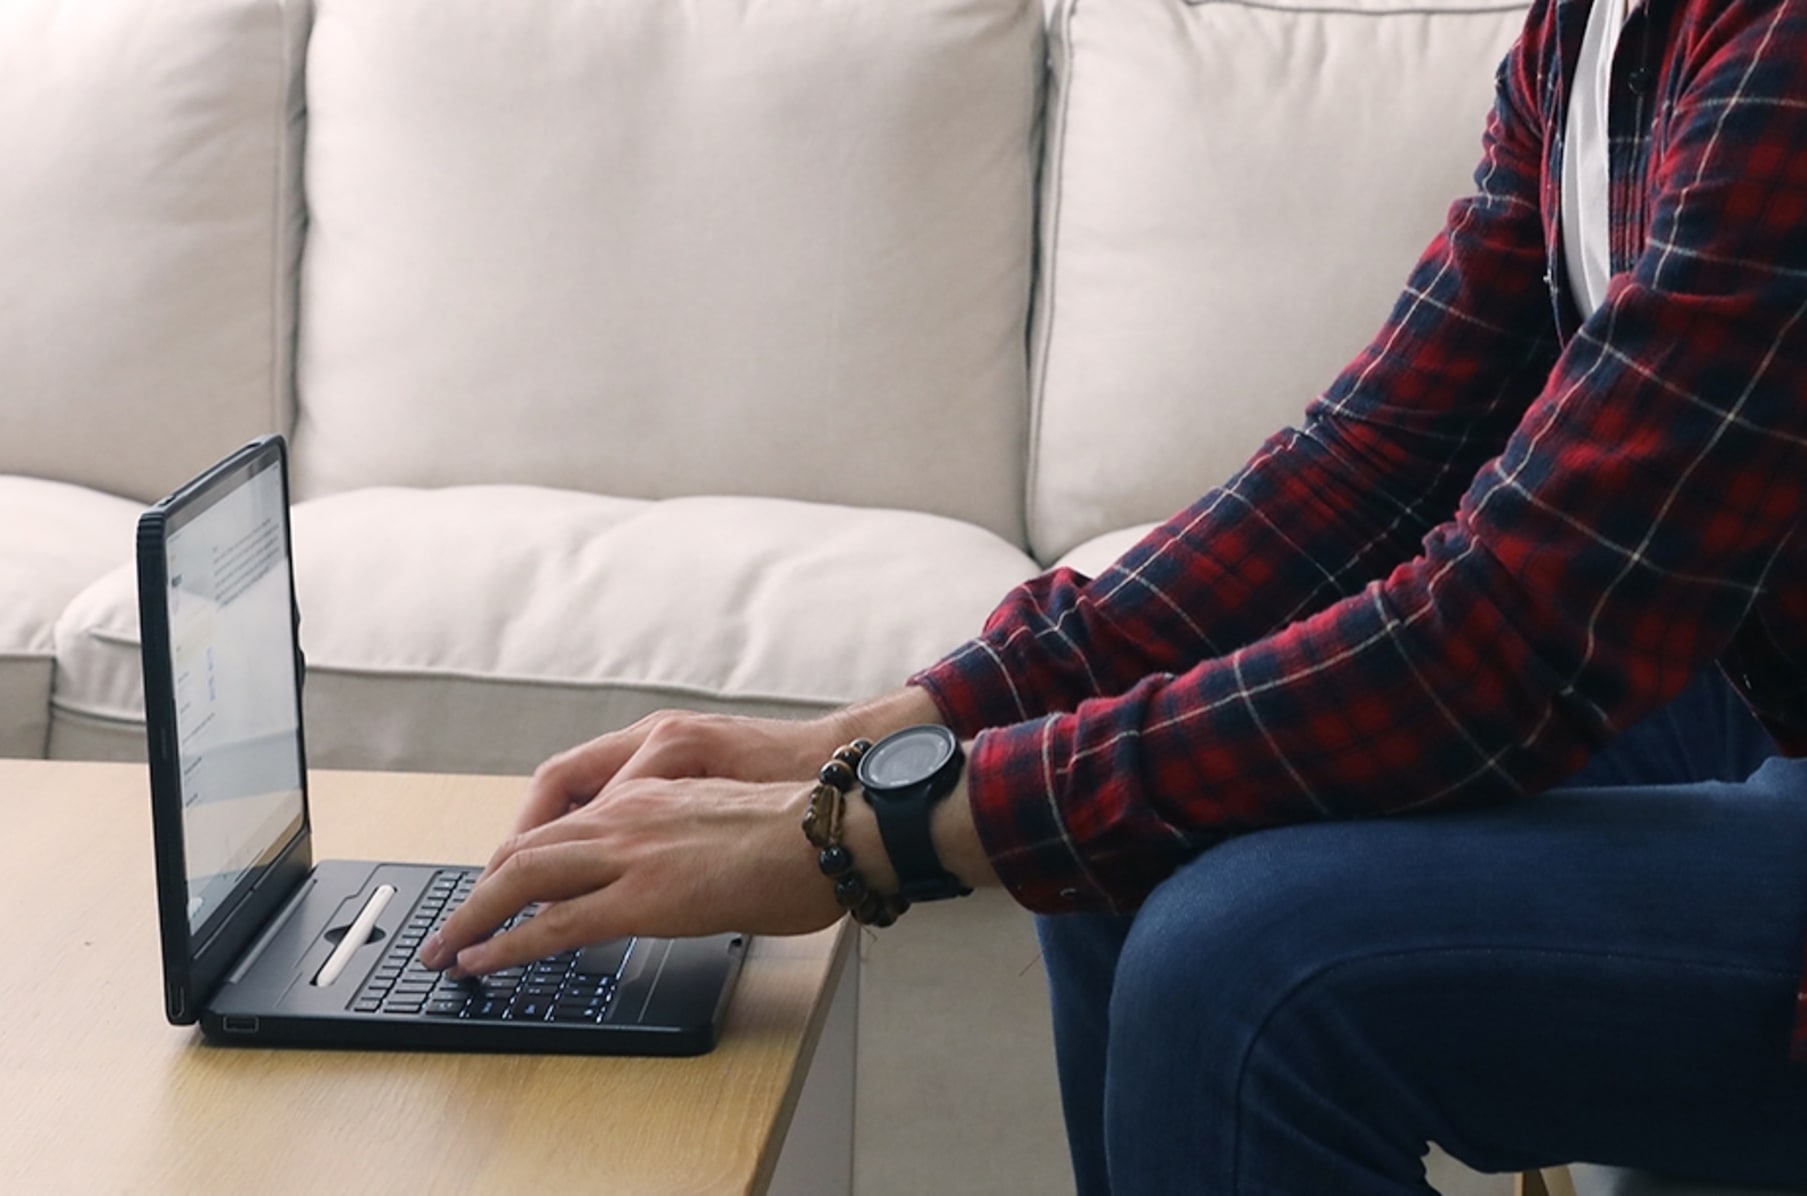 The Most Functional Keyboard for iPad Pro | Indiegogo